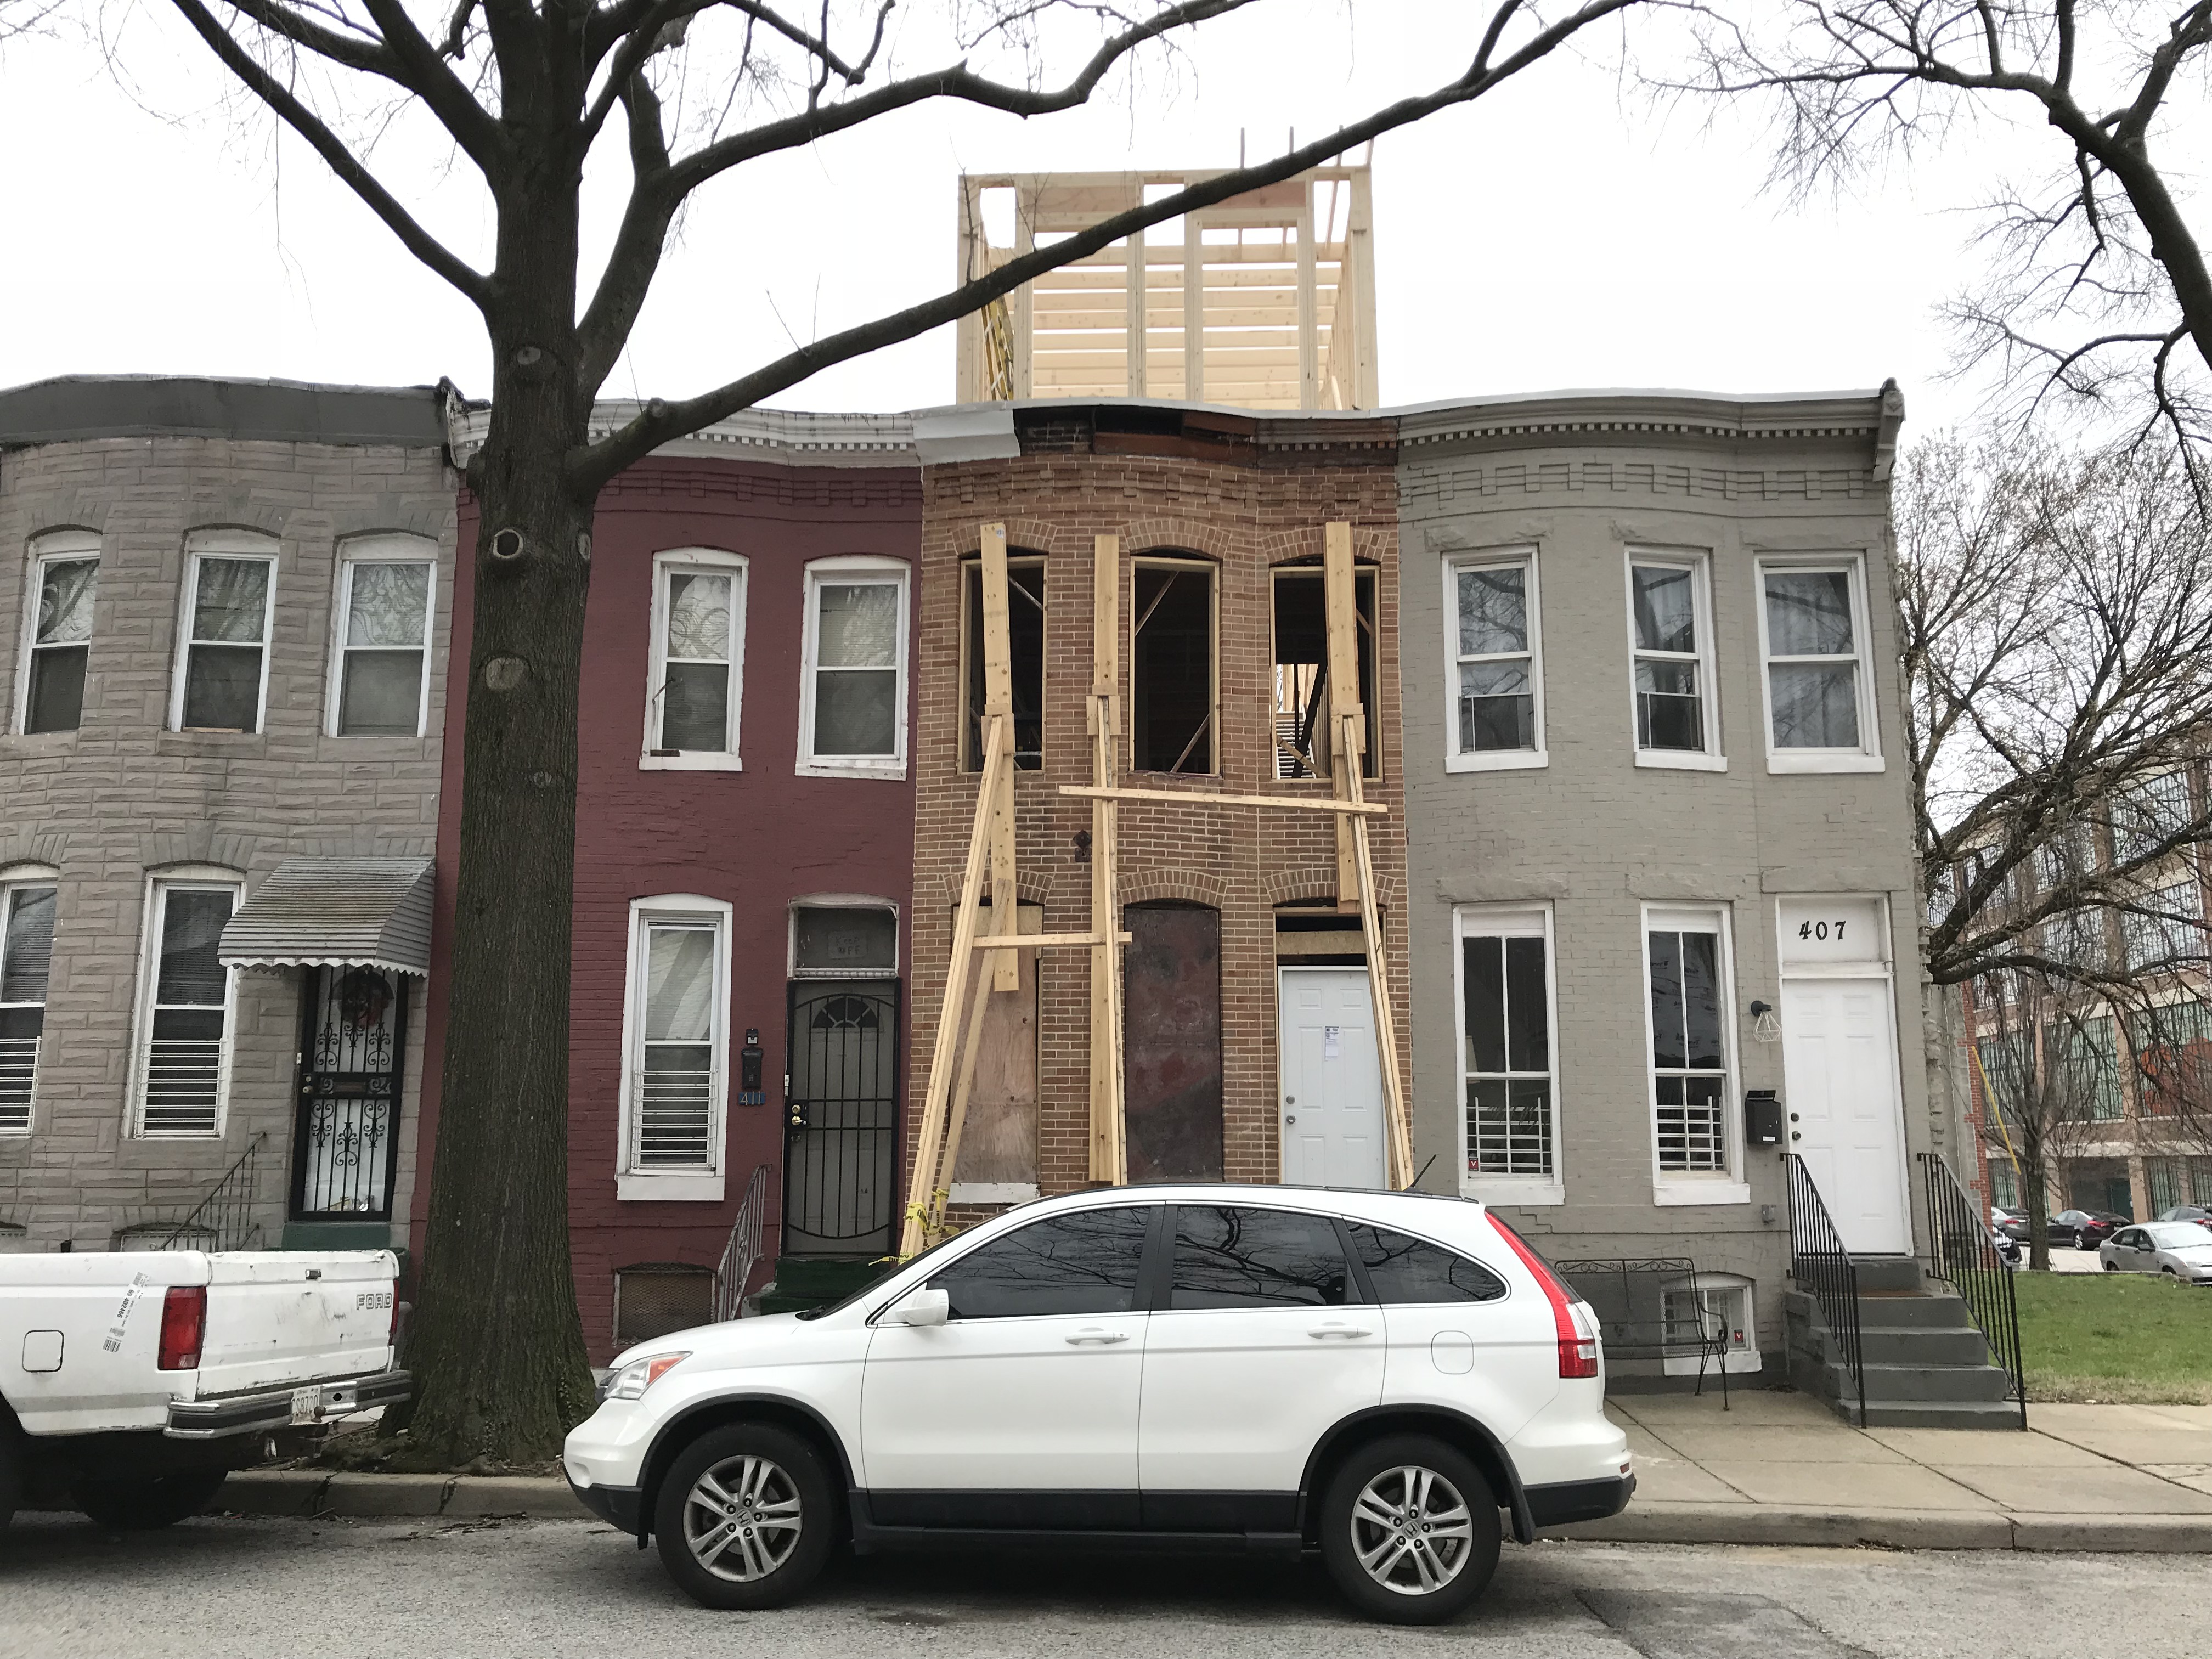 Rooftop addition and rowhouse rehabilitation, 409 E. Federal Street, Baltimore, MD 21202, Baltimore, Building, Car, Maryland, HQ Photo